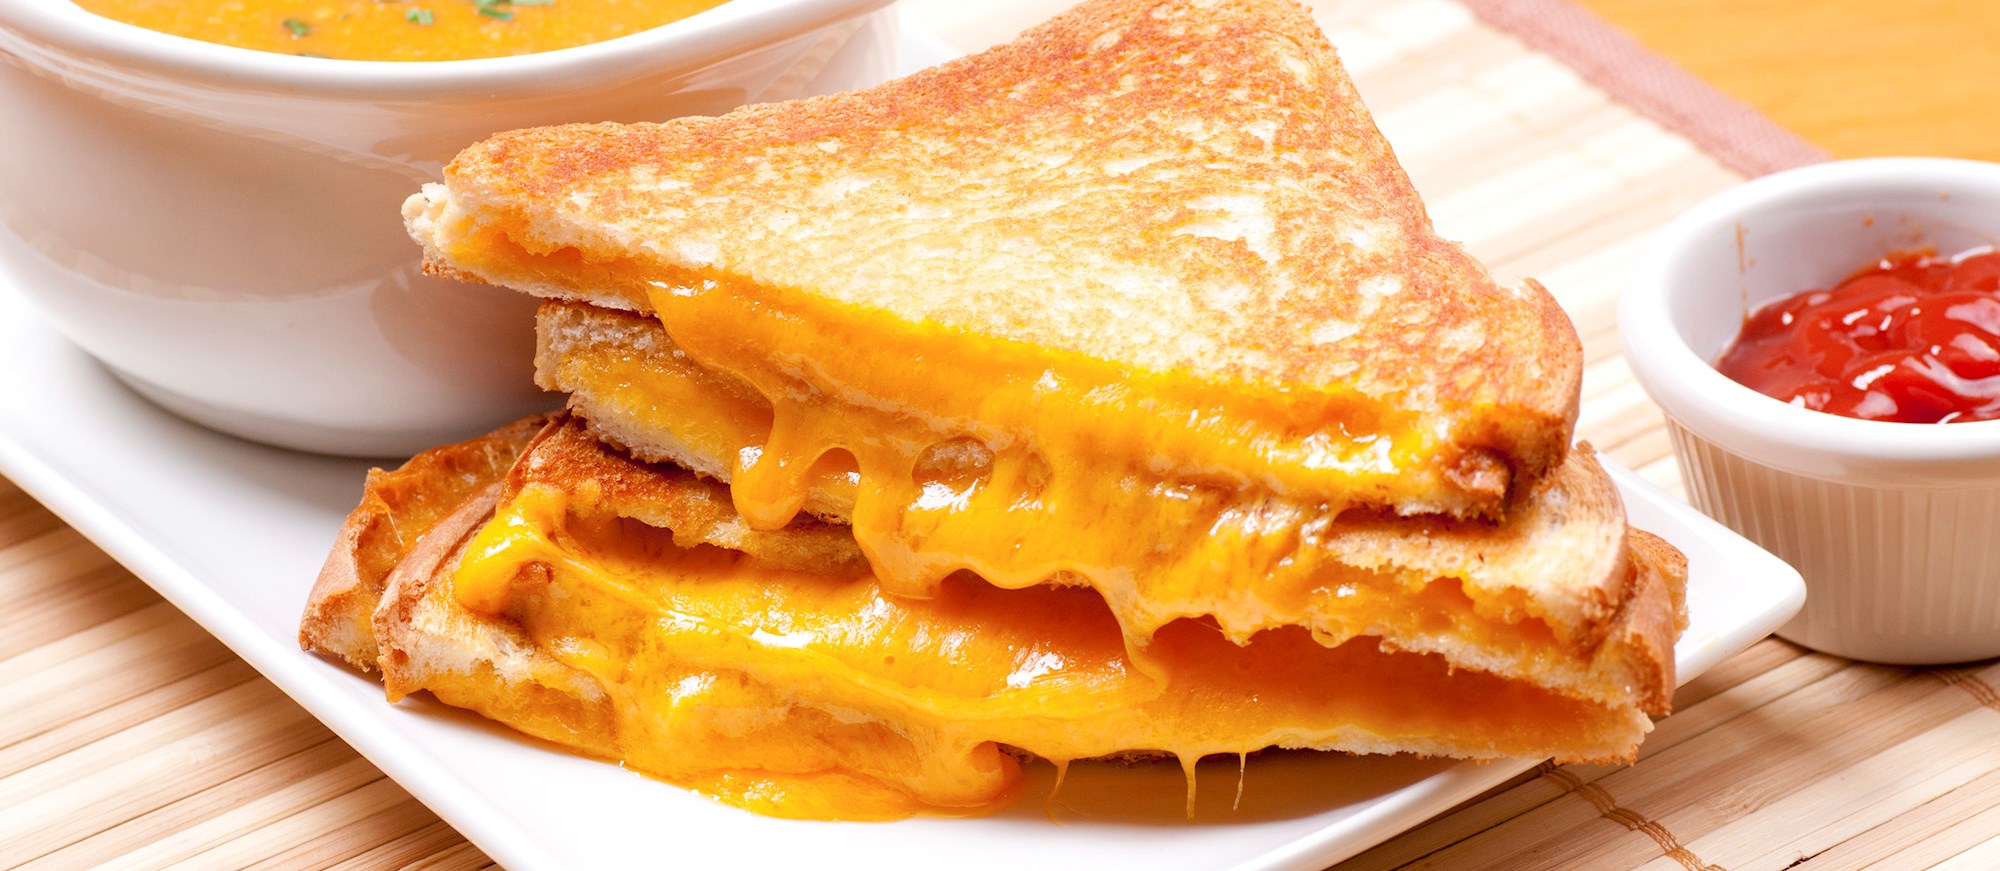 Where to Eat the Best Grilled Cheese in the World? | TasteAtlas